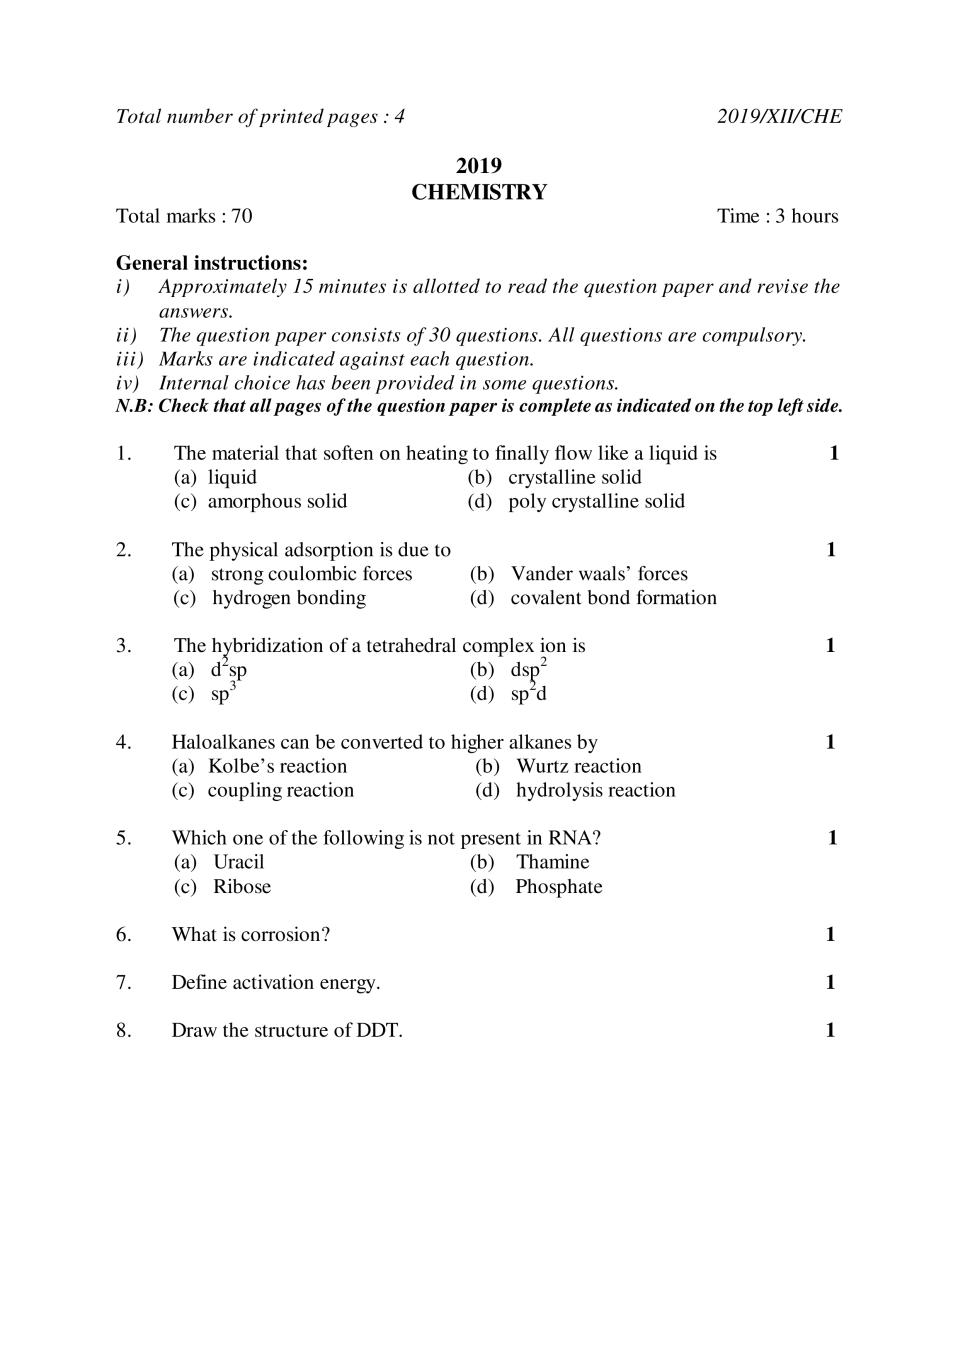 NBSE Class 12 Question Paper 2019 for Chemistry - Page 1